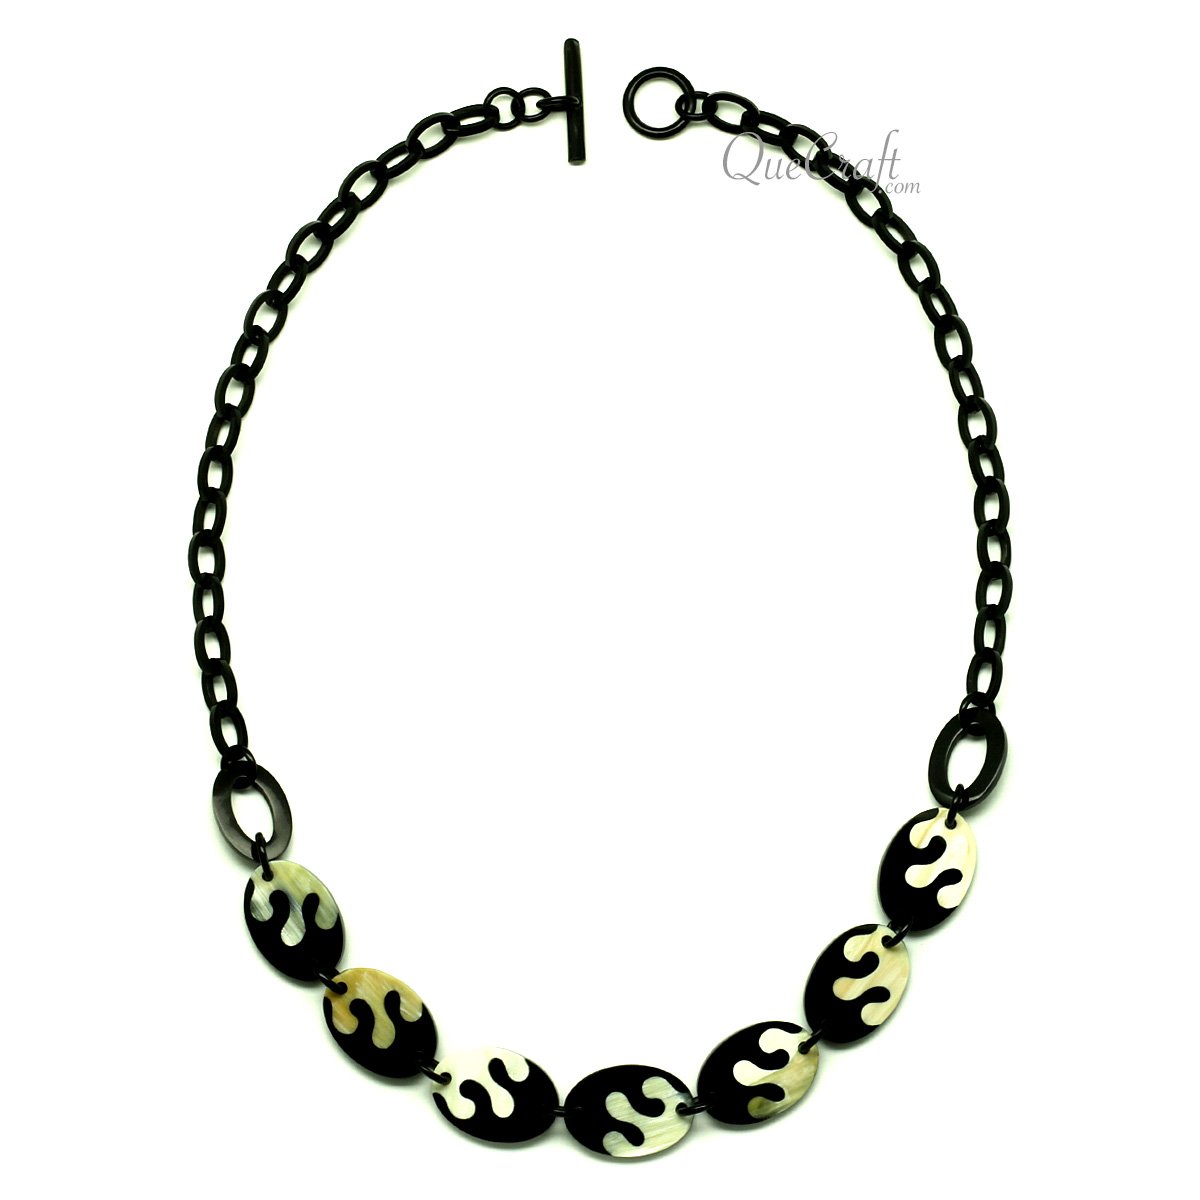 Horn Chain Necklace #13139 - HORN JEWELRY